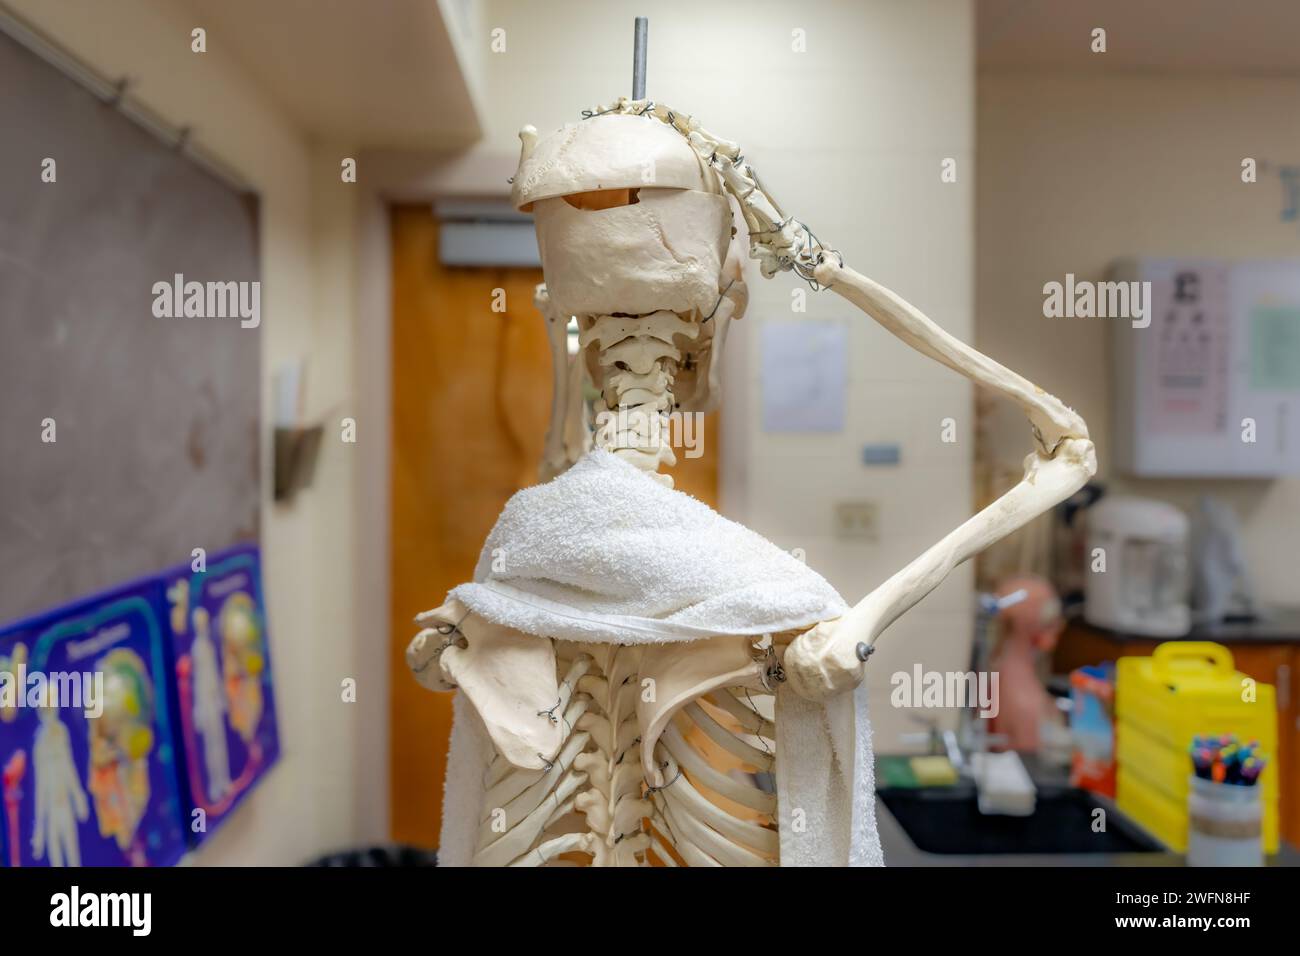 Skeleton with white towel over shoulders and showing emotion with both hands on head as if showing stress, disbelief, or worried. Stock Photo